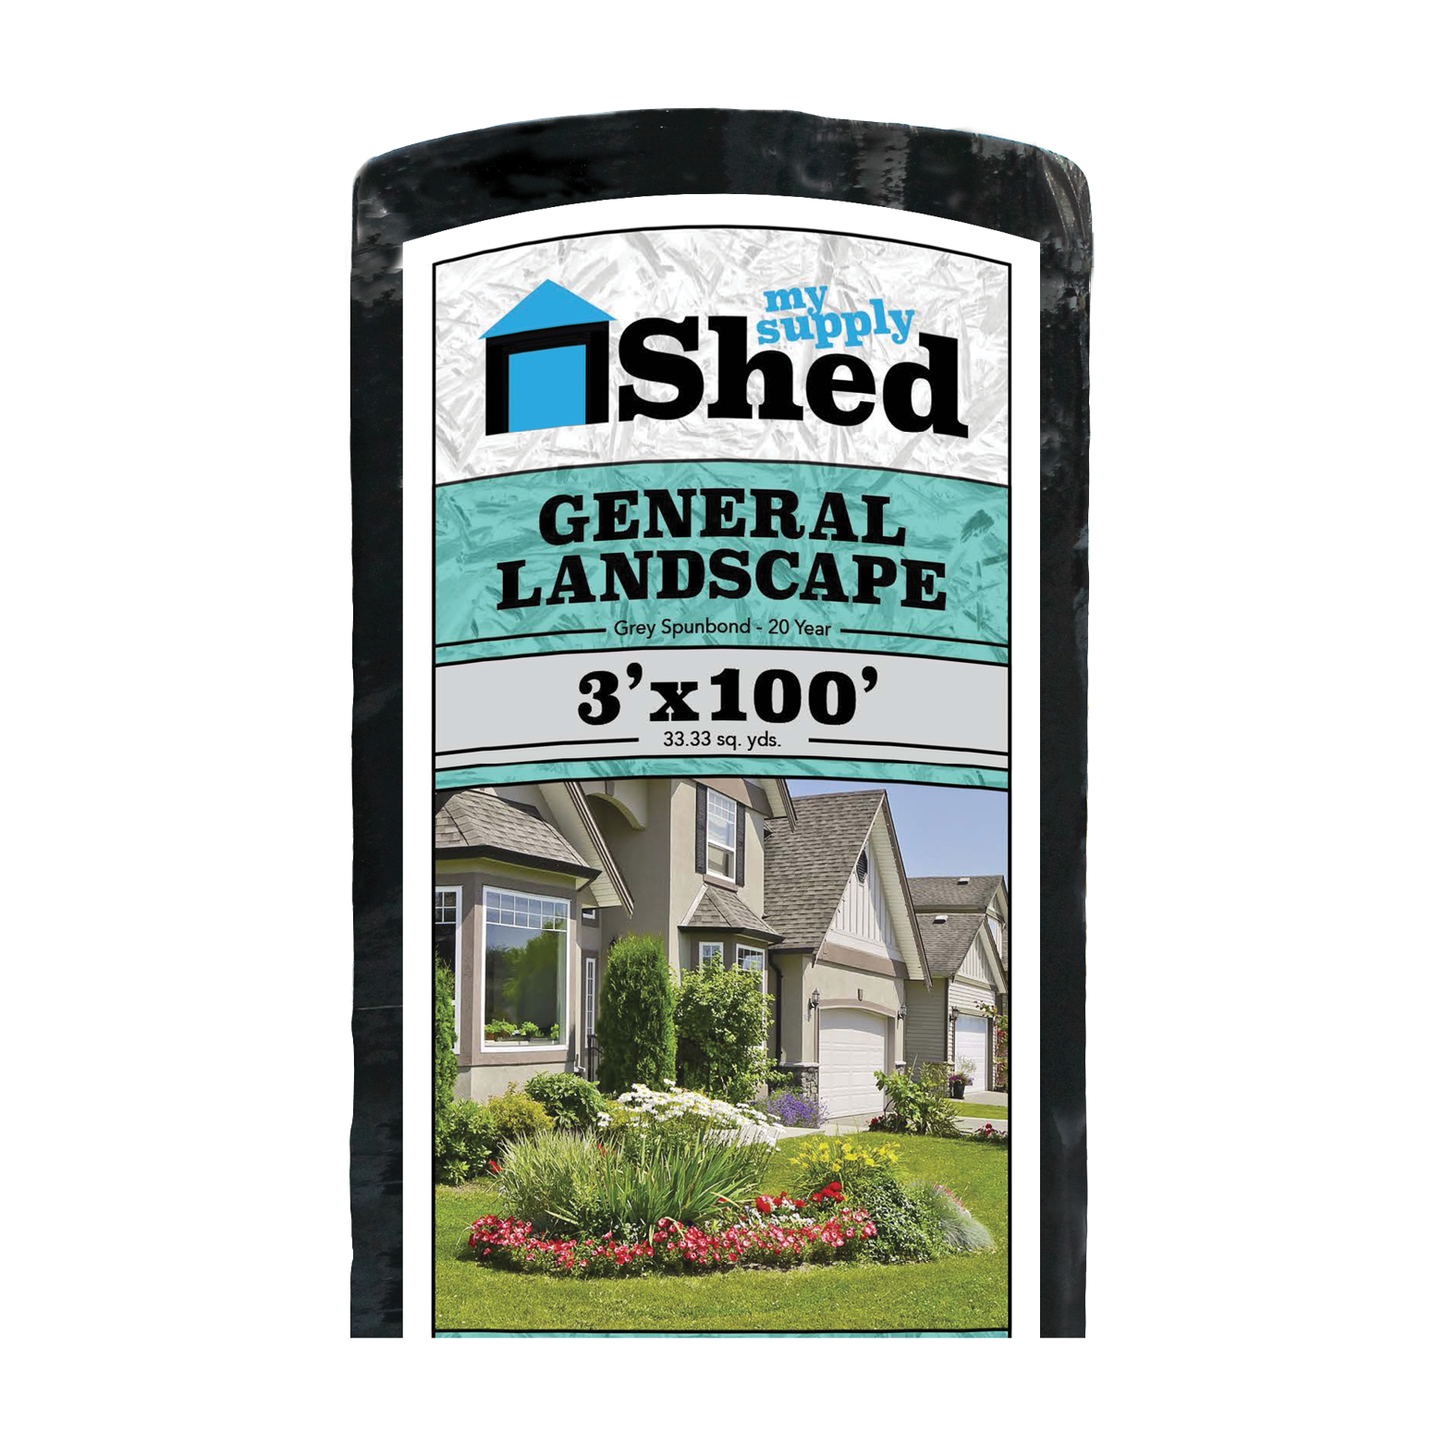 My Supply Shed General Landscape Fabric, 20 Year (3oz)